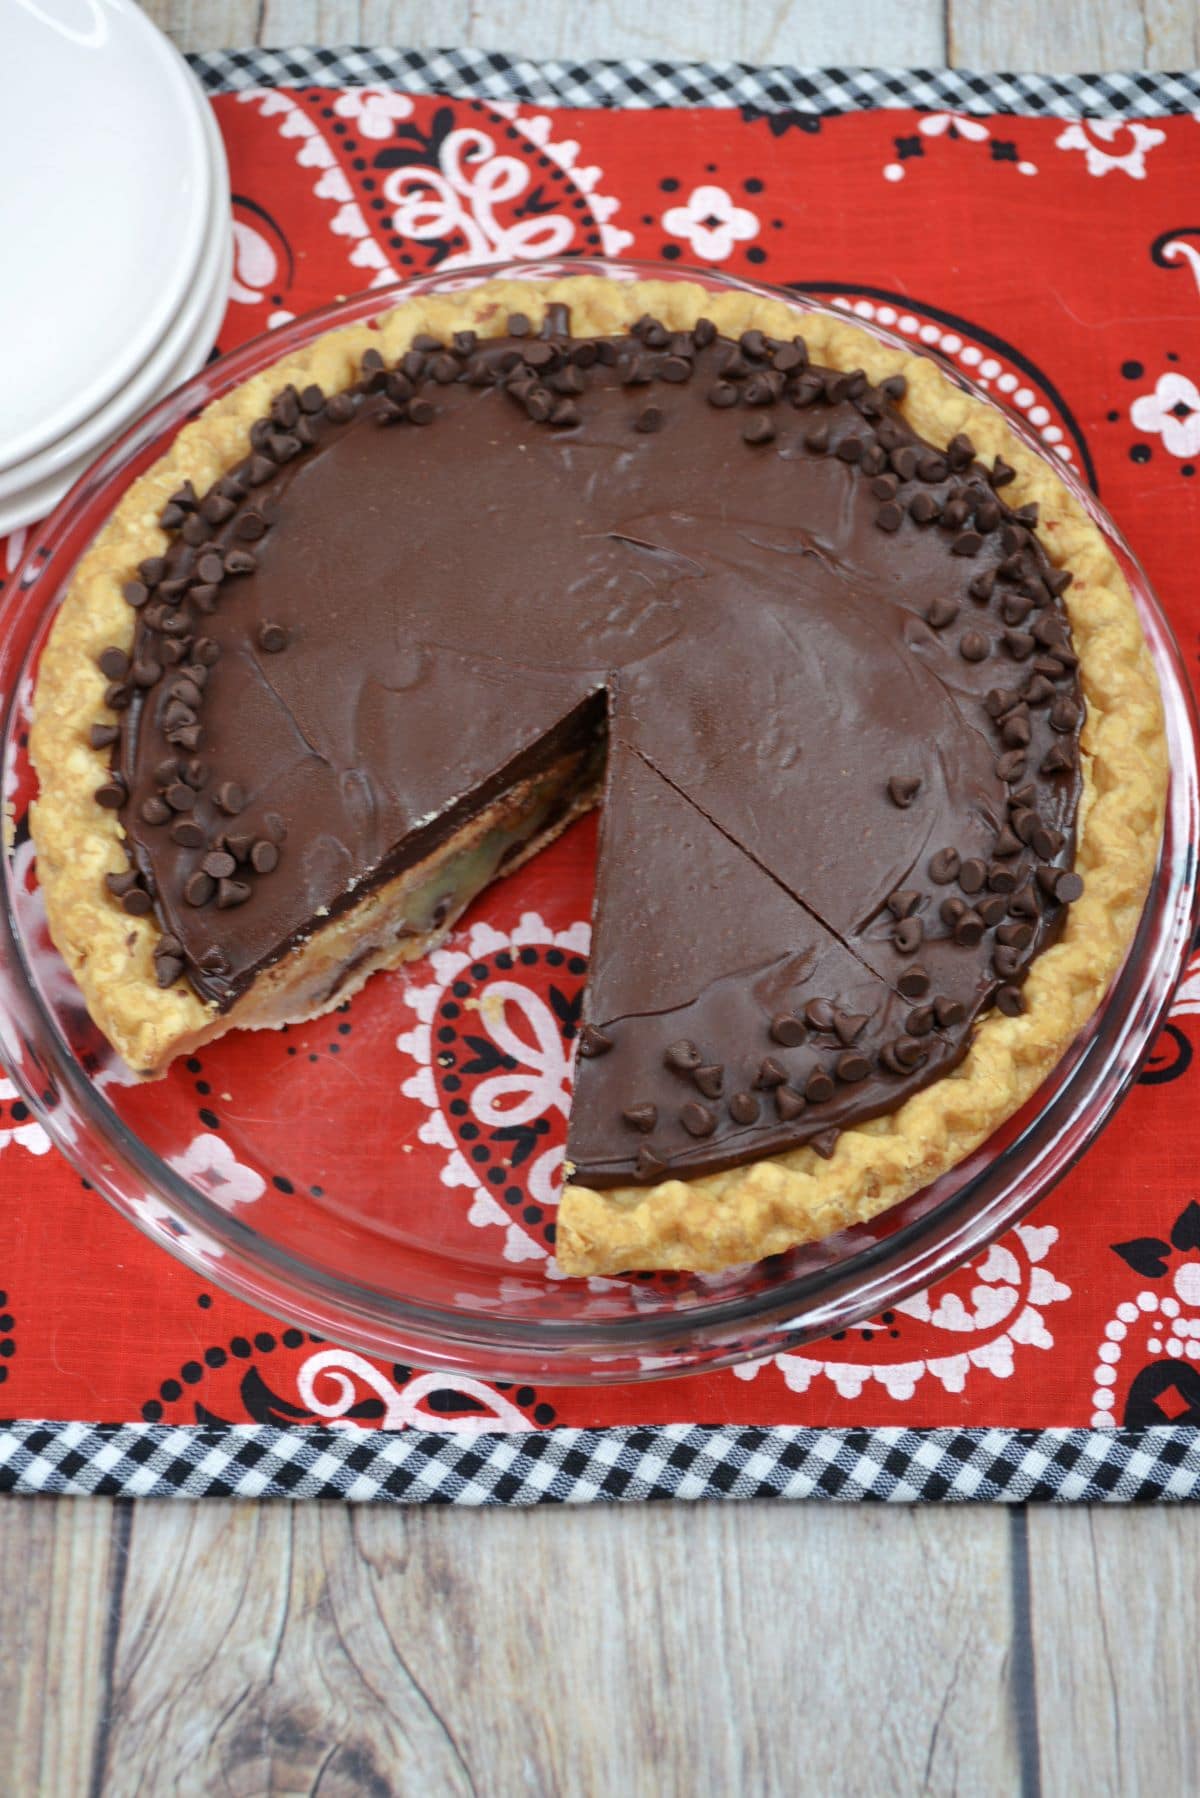 Kentucky derby pie on a pie plate on a red, white and black table cloth